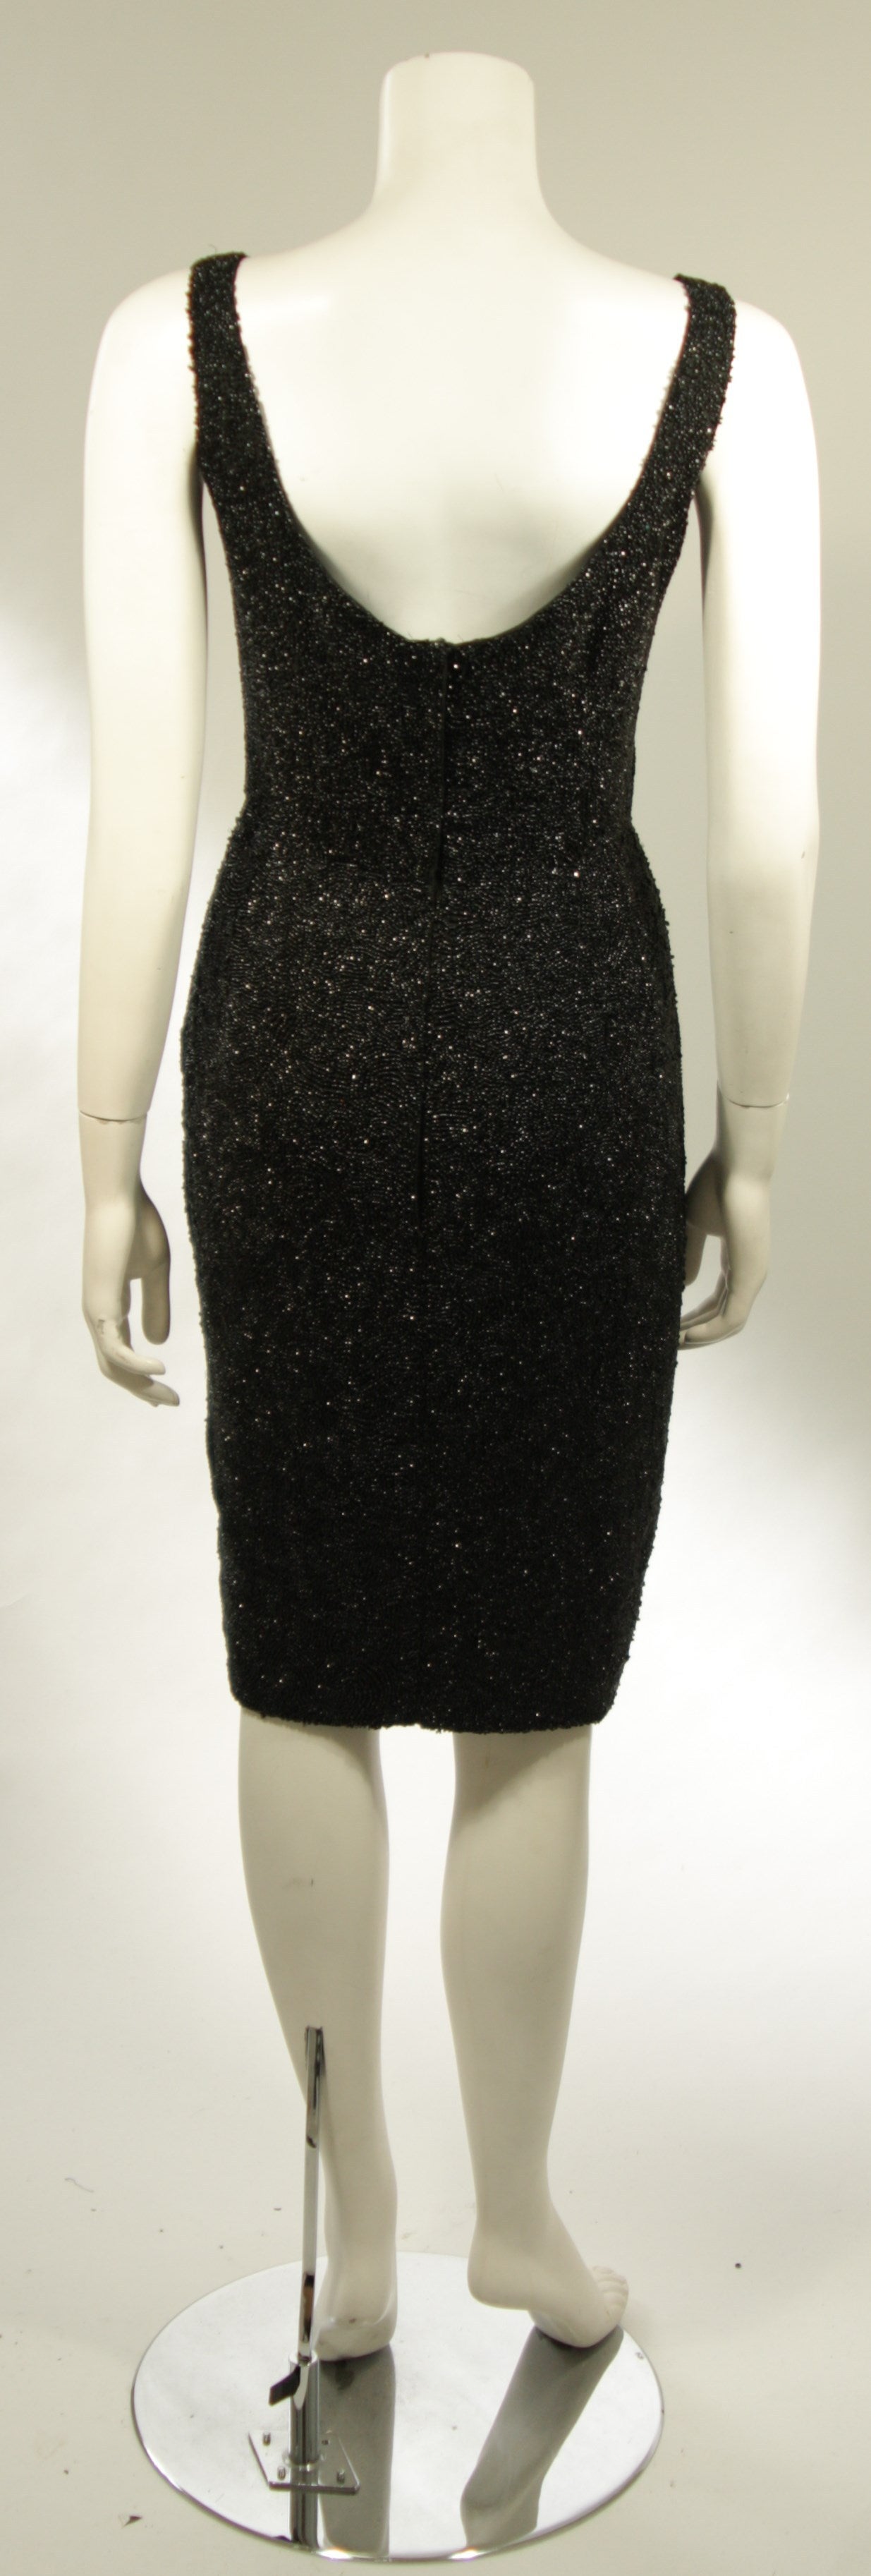 1960's Rare Black Caviar Beaded Cocktail Dress Size Large For Sale 5